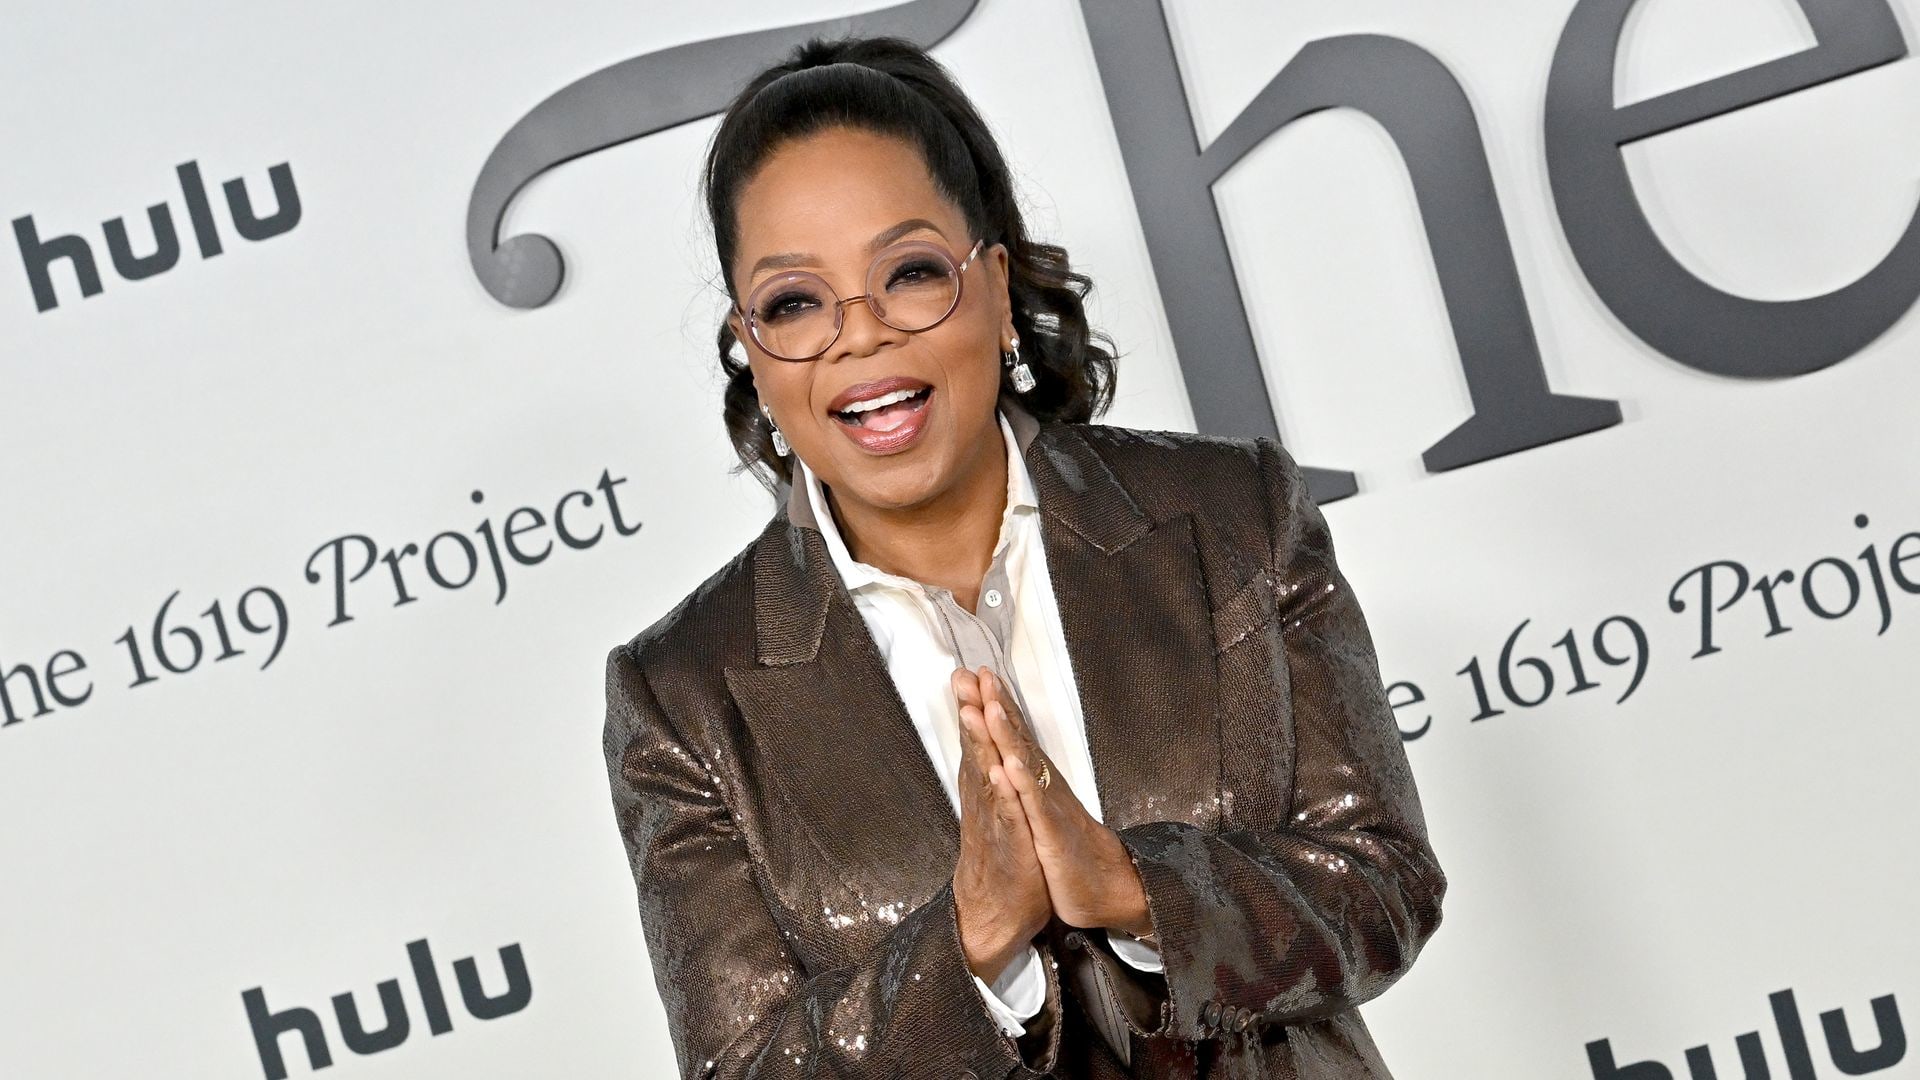 Oprah Winfrey, 69, shares shocking weight loss confession thumbnail